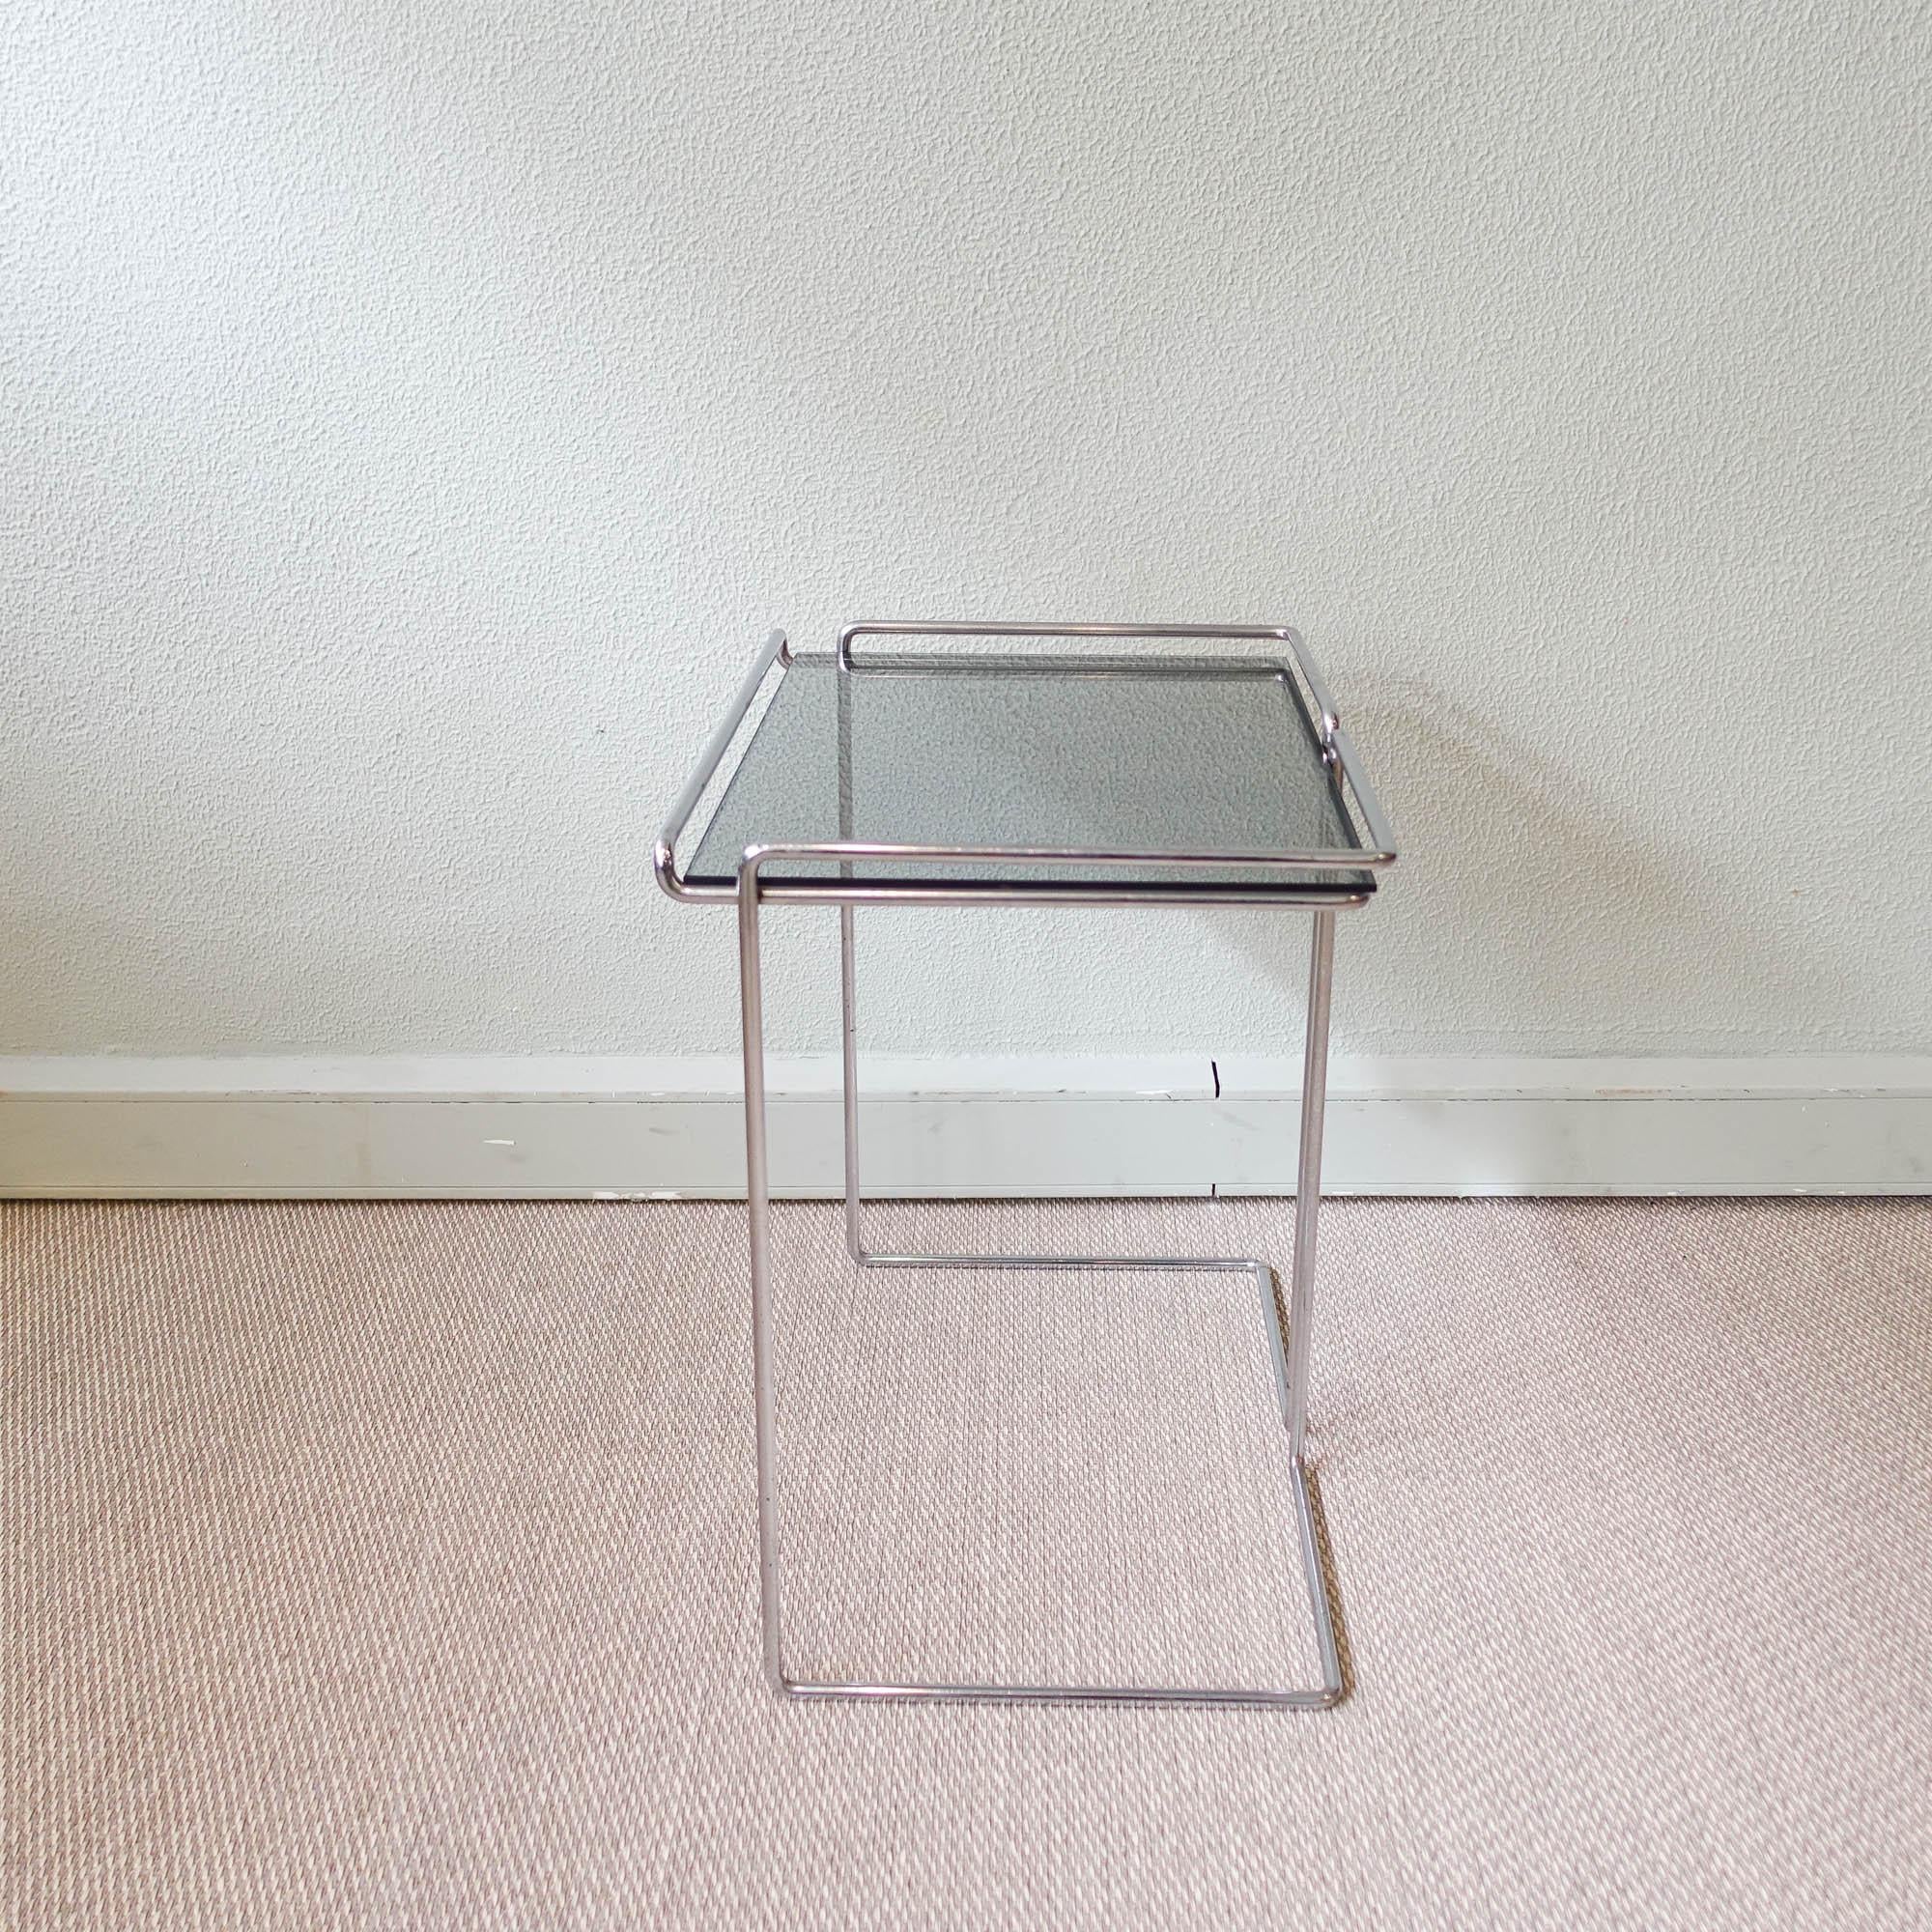 This side table was designed and produced in France, during the 1970's. Graphic, minimalist design, made of chromed wire steel and a smoked glass top. Similar to the Isocele design, from Max Sauze for Atrow. In original and good vintage condition.